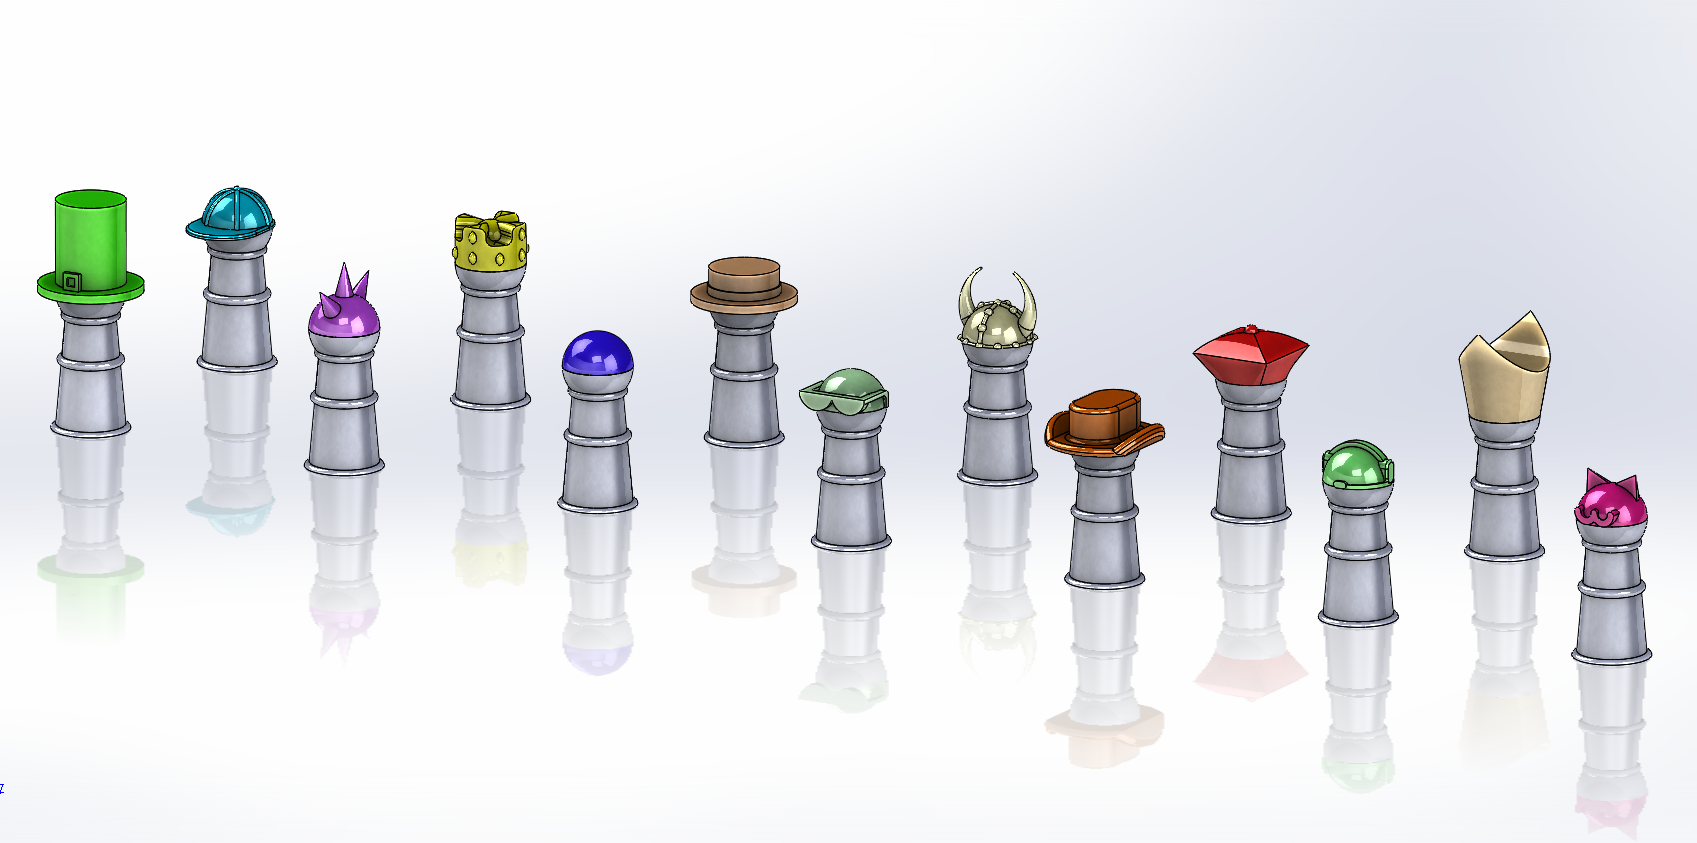 Game Pieces with Interchangeable Hats